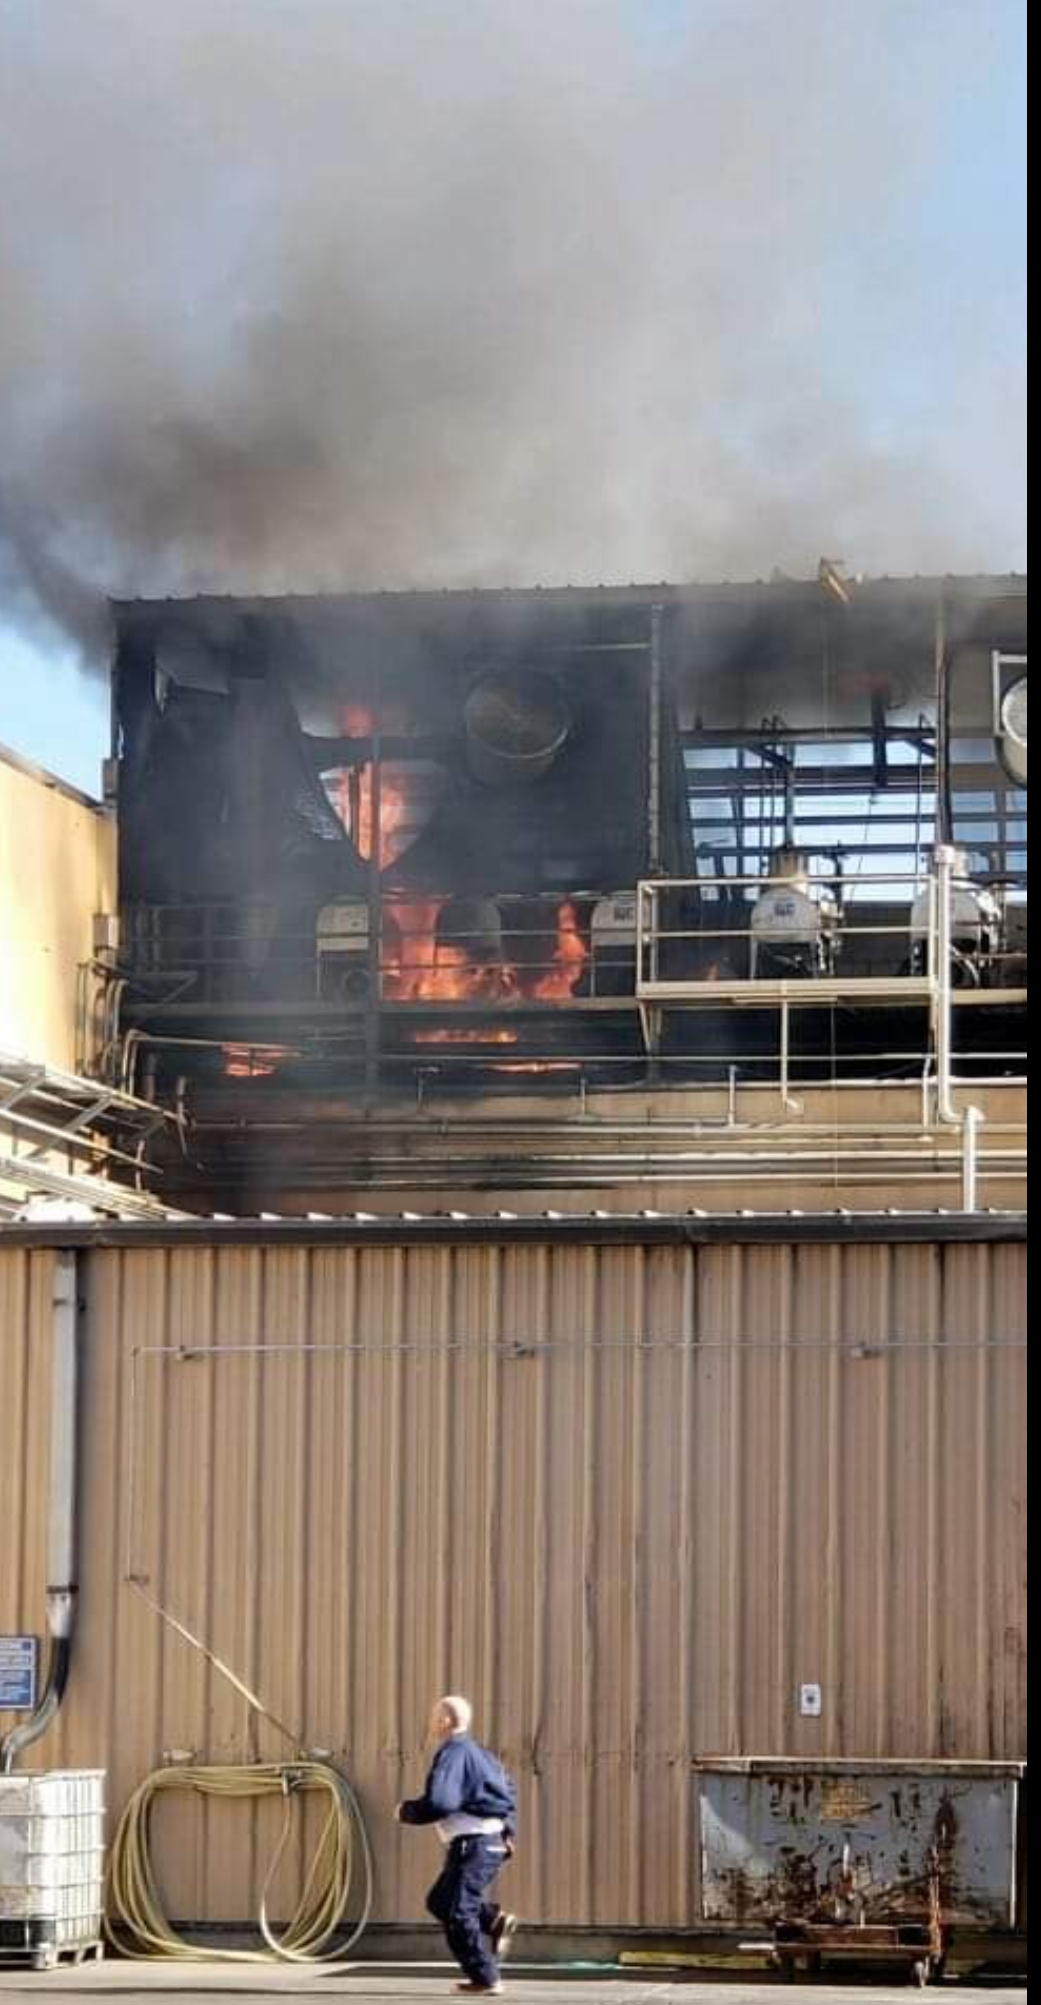 A fire at the Hilmar Cheese Factory was seen from several miles away